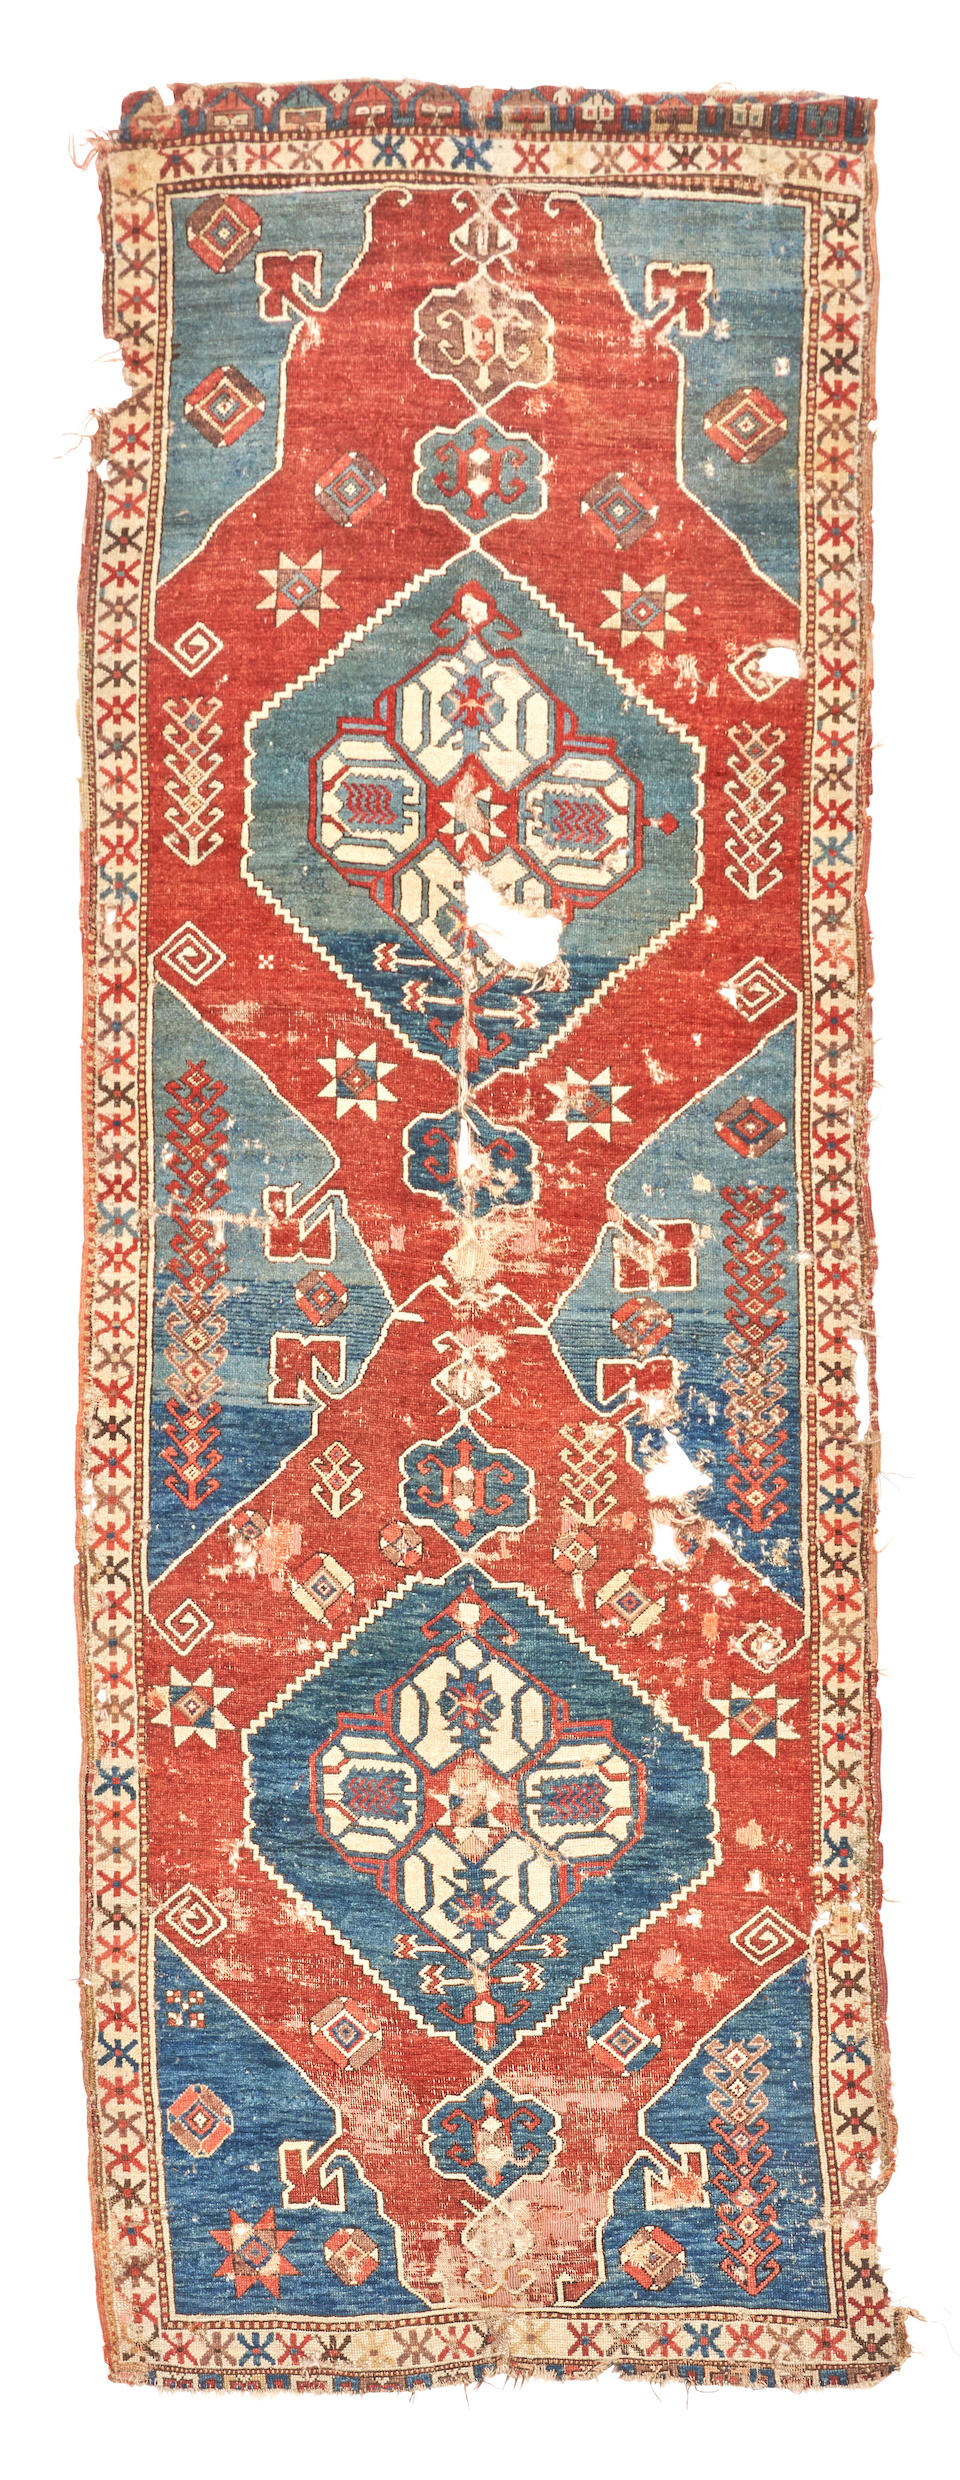 Karapinar Rug Anatolia 3 ft. 9 in. x 11 ft. 10 in.